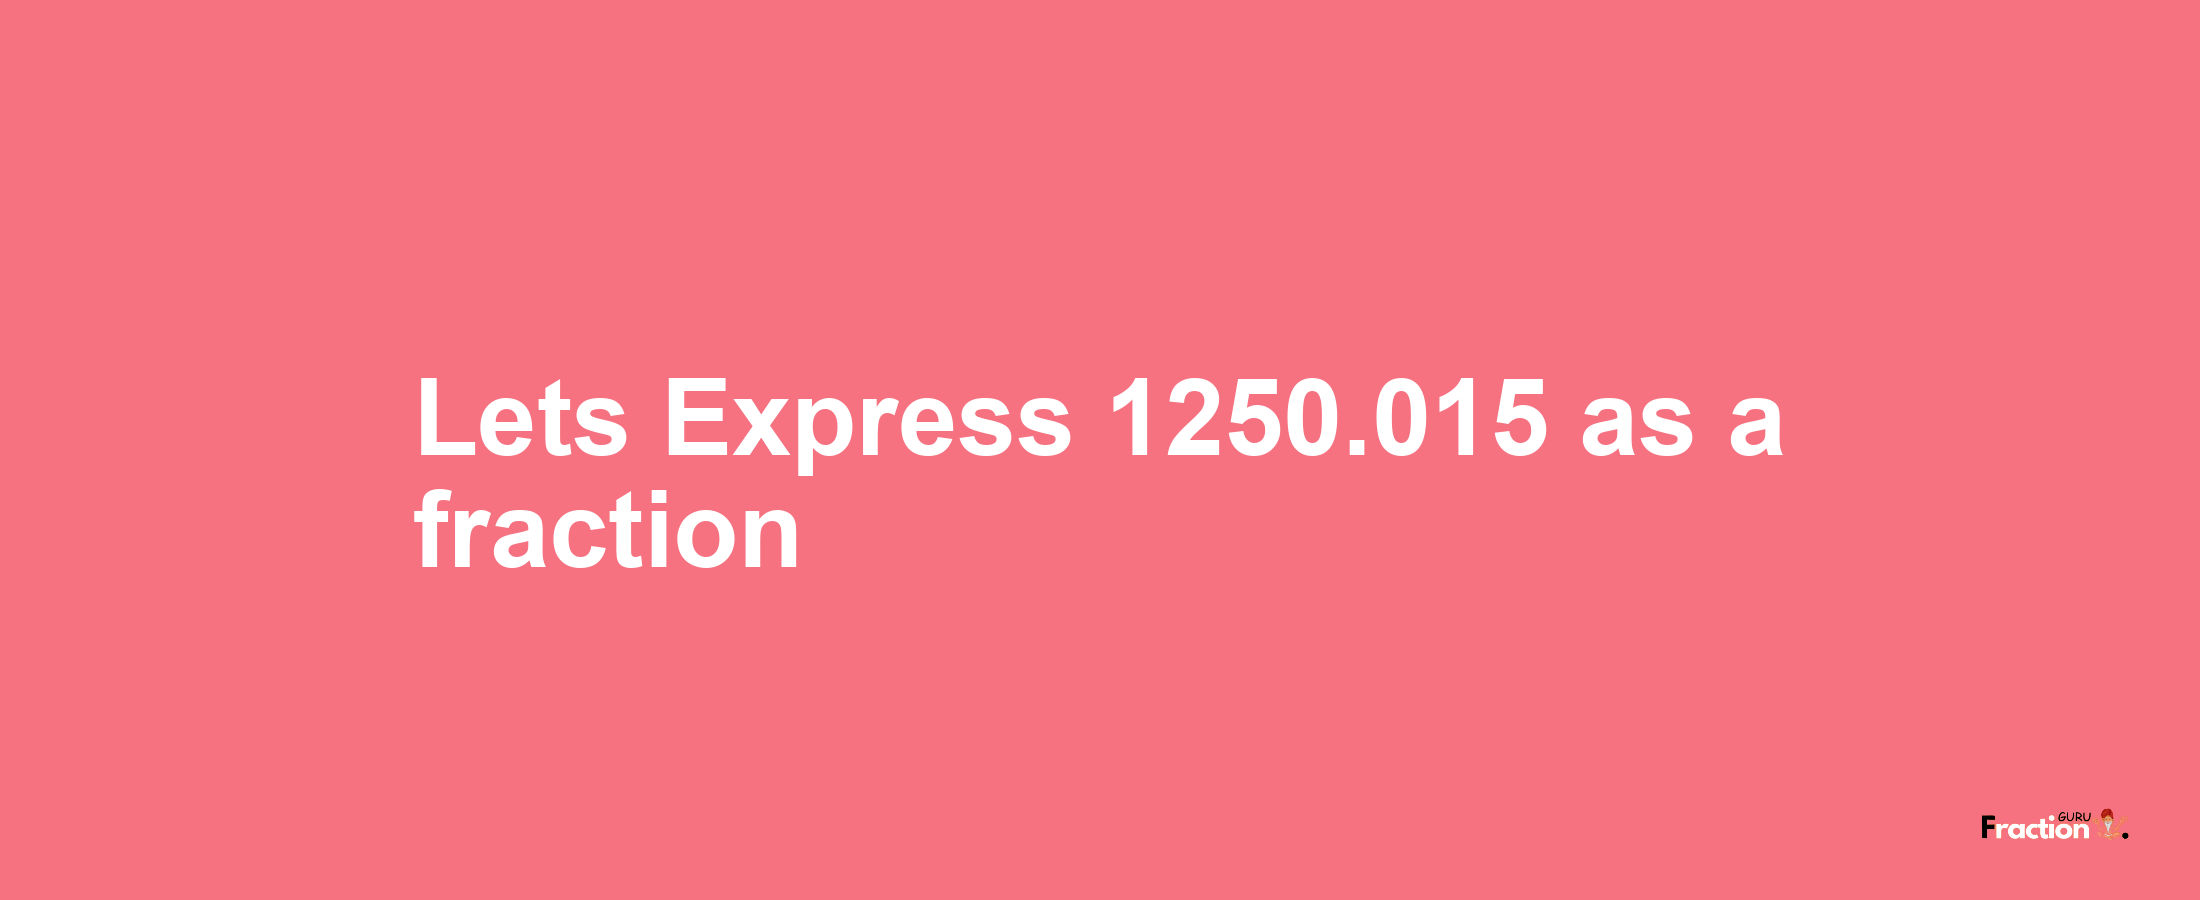 Lets Express 1250.015 as afraction